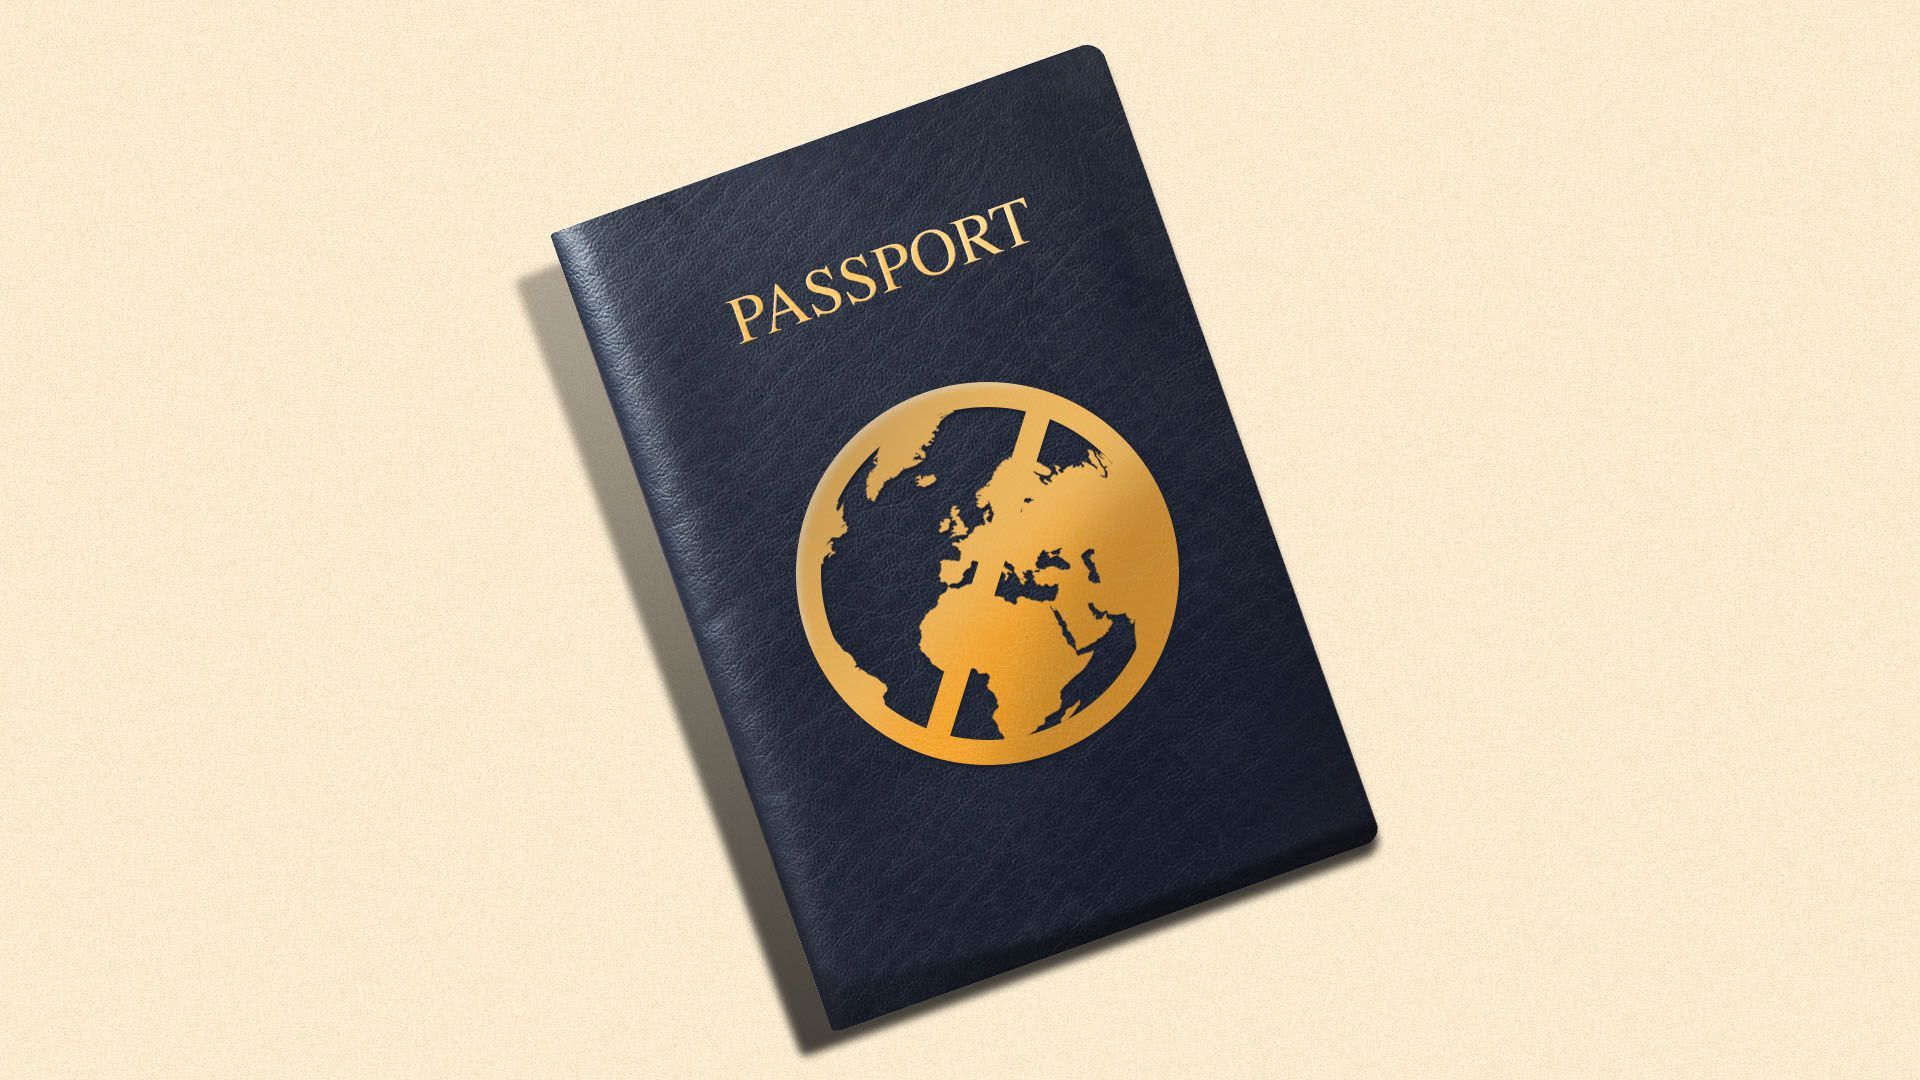 Illustration of a passport with the world map crossed out on the front cover